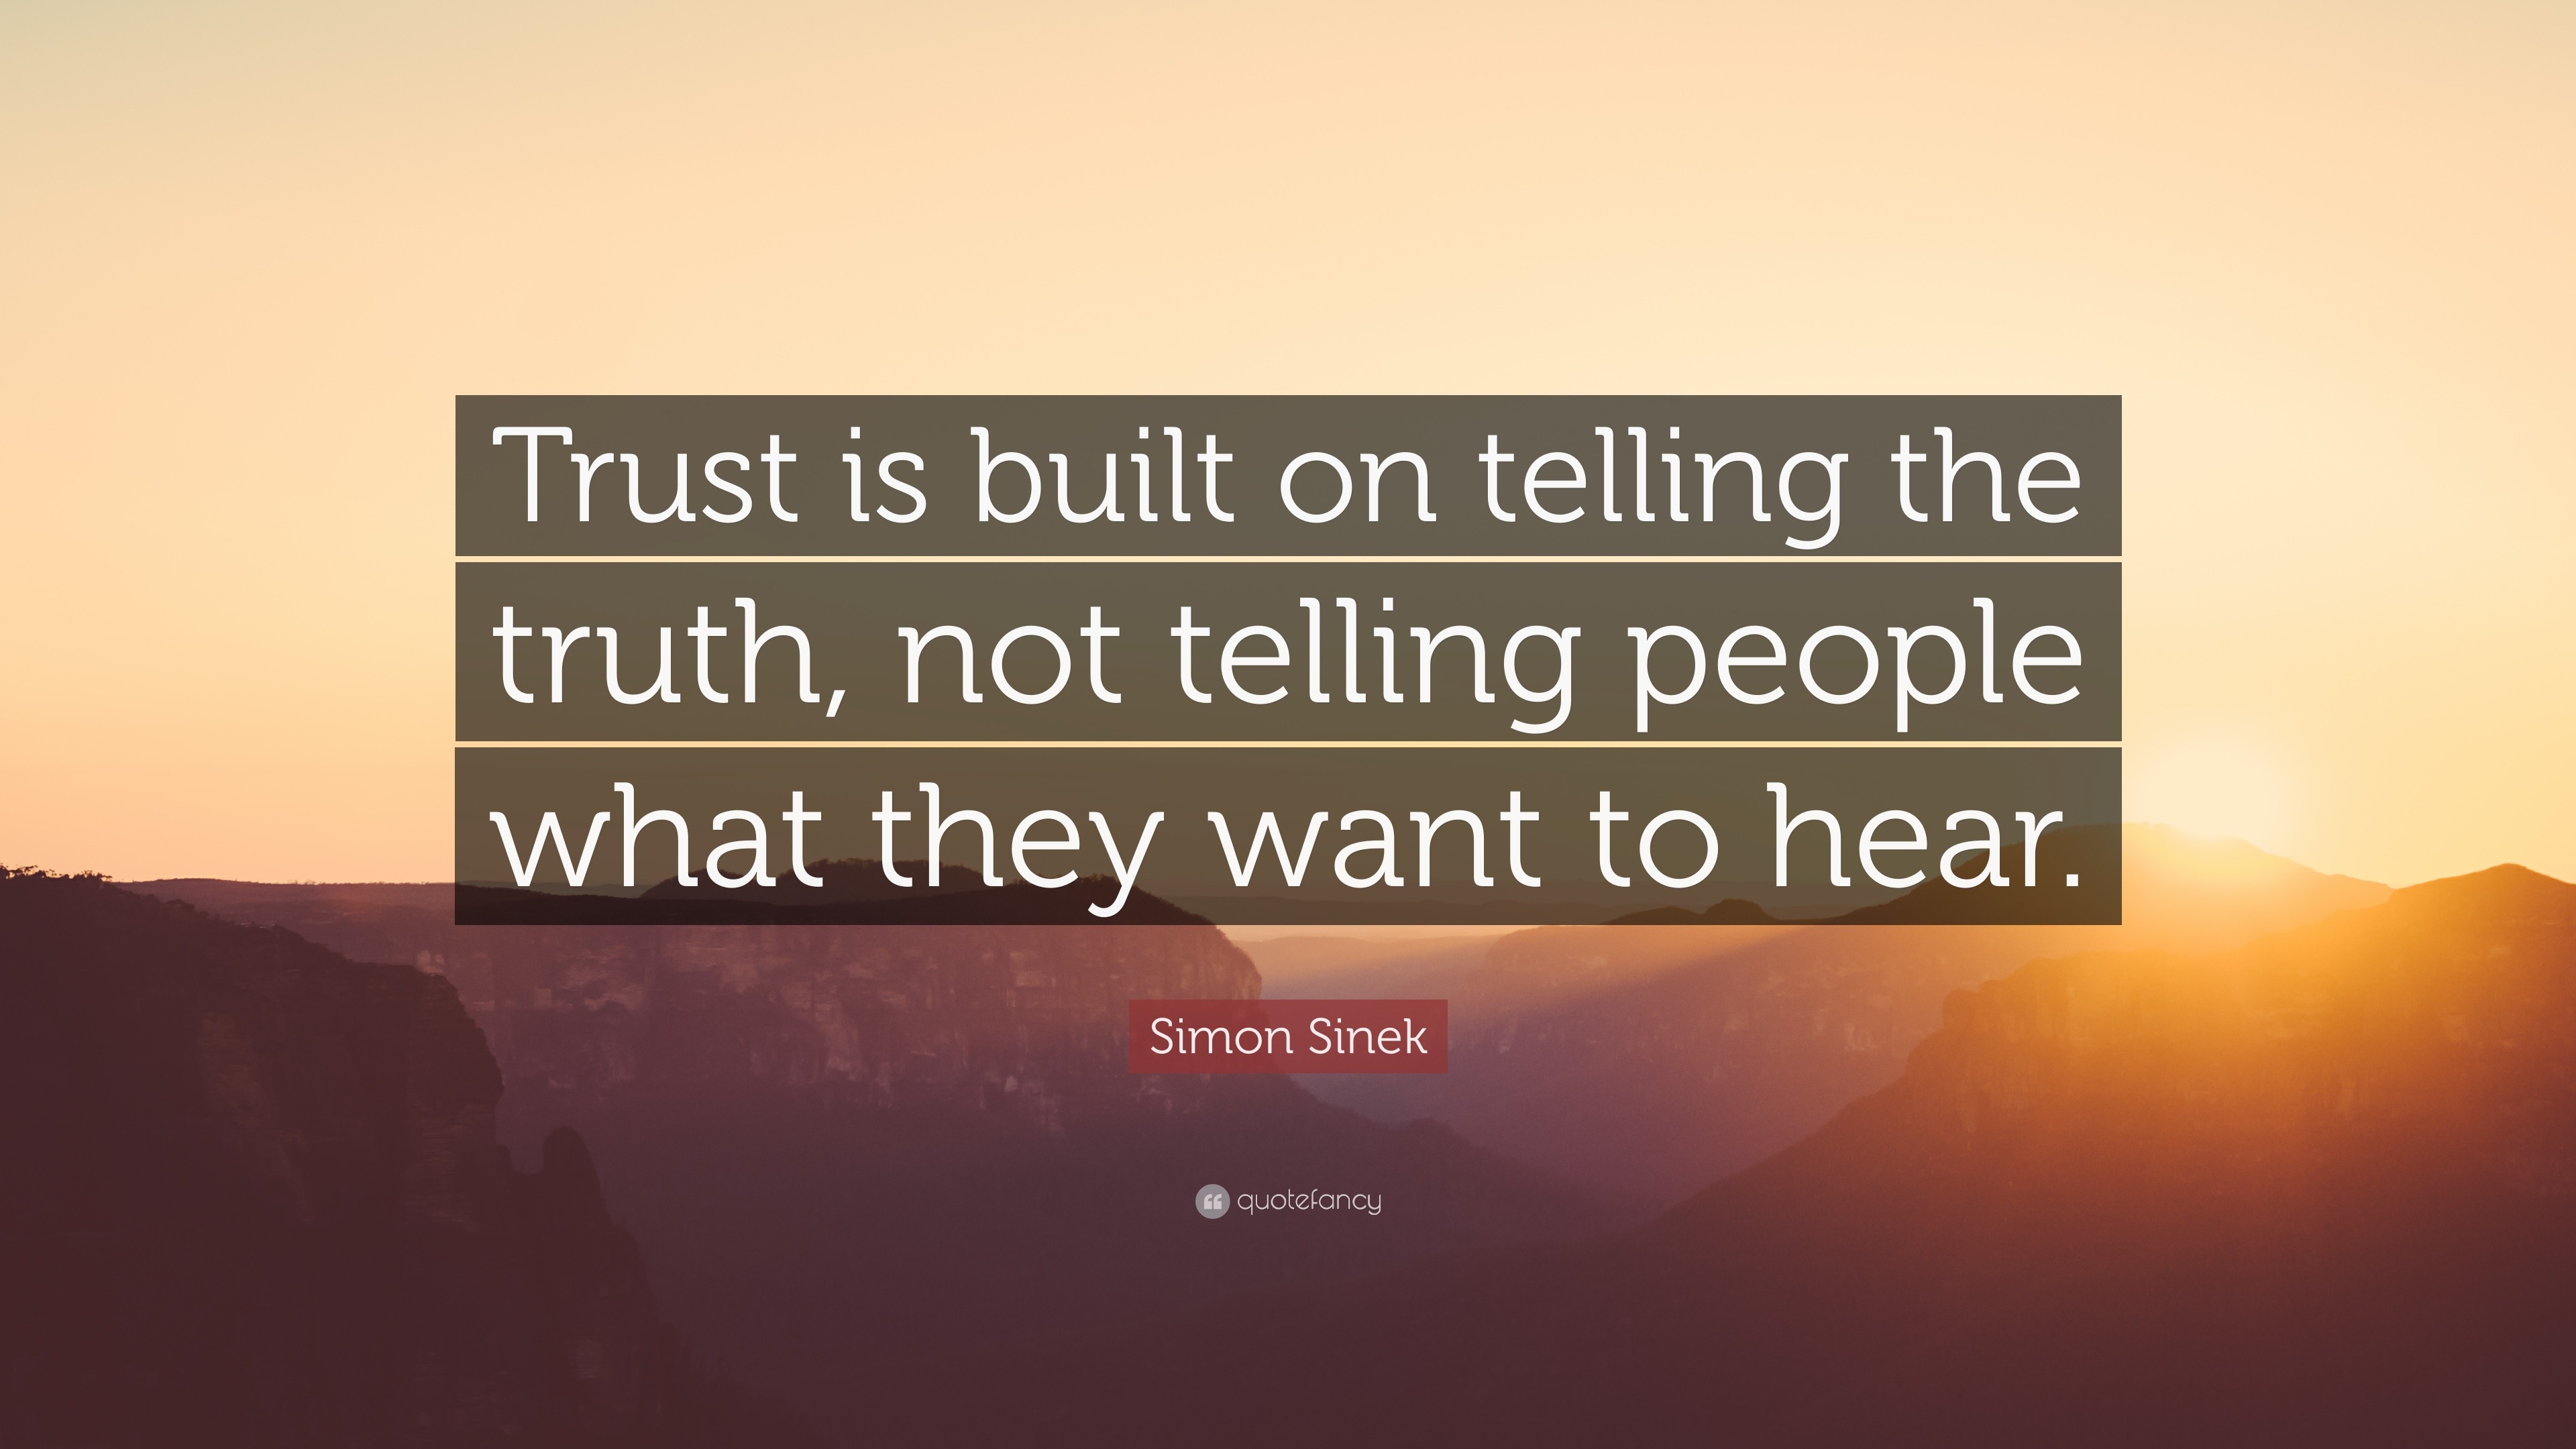 Simon Sinek Quote: “Trust is built on telling the truth, not ...